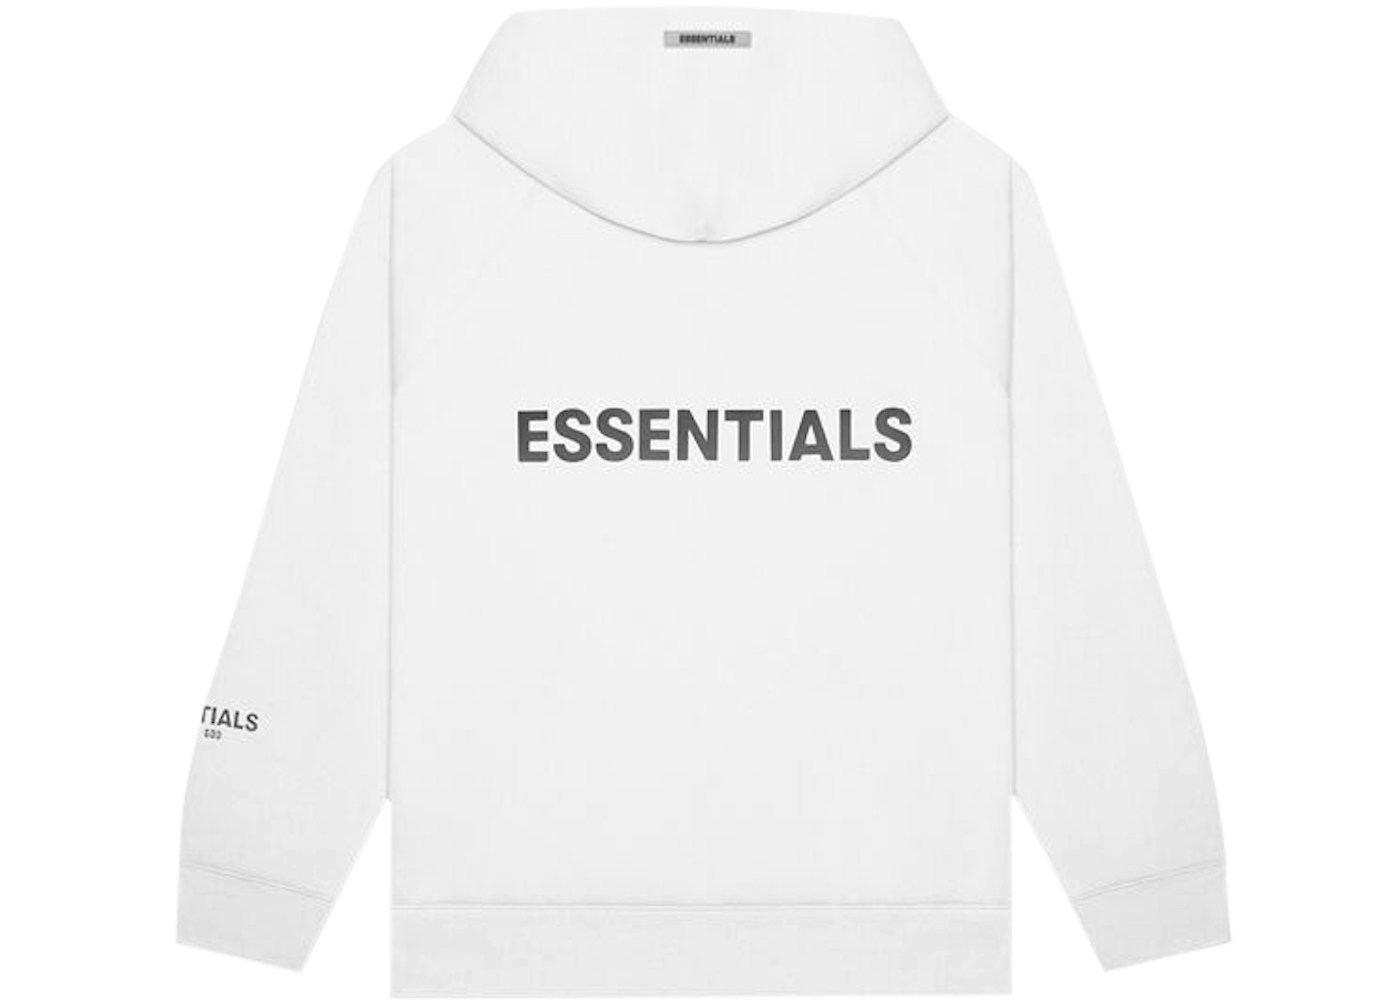 FEAR OF GOD ESSENTIALS 3D Silicon Applique Full Zip Up Hoodie White - SS20